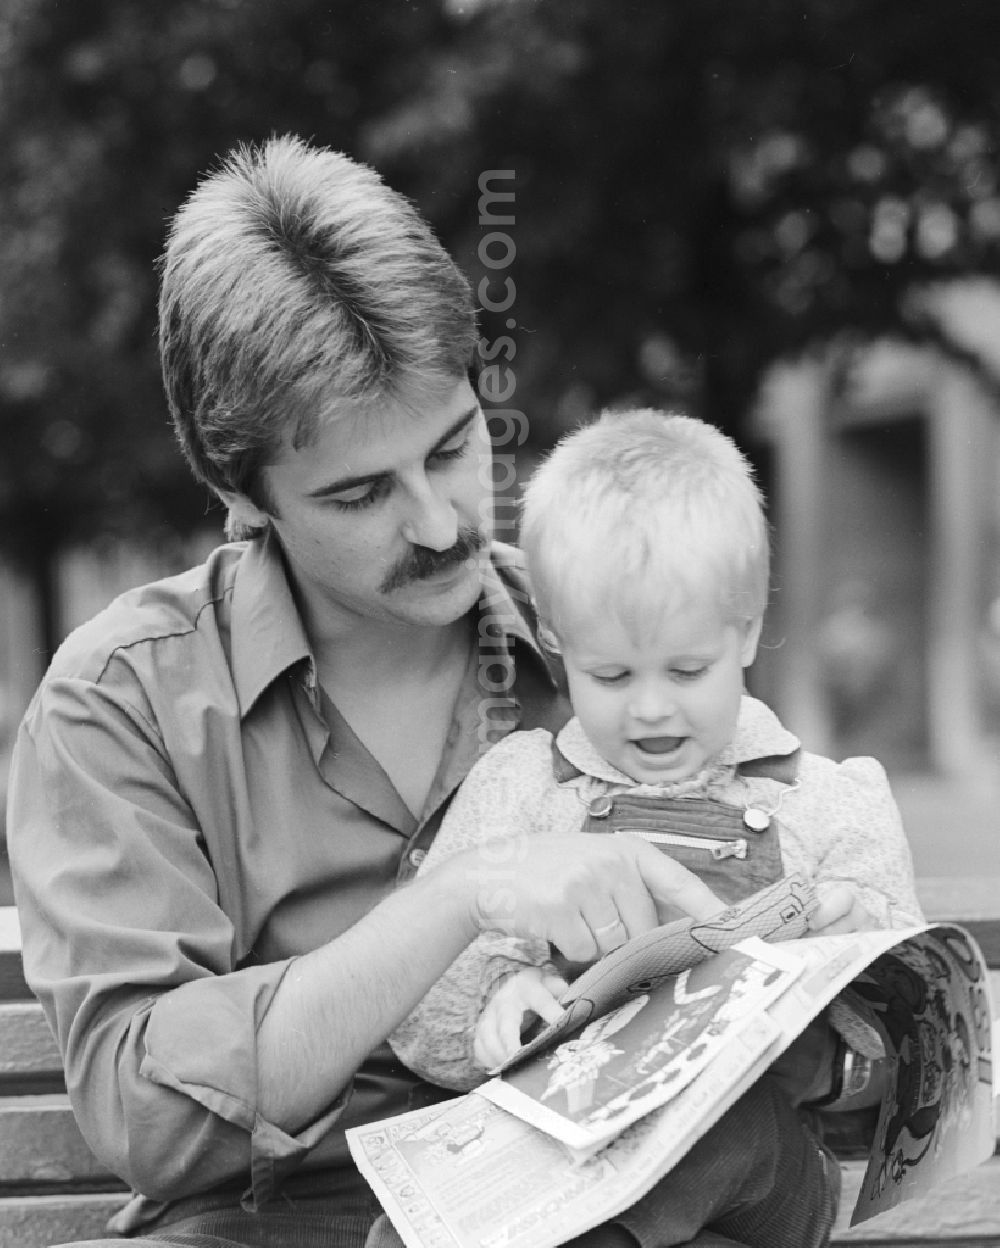 GDR picture archive: Berlin - Father sitting with his child on a bench and read a magazine in Berlin, the former capital of the GDR, the German Democratic Republic